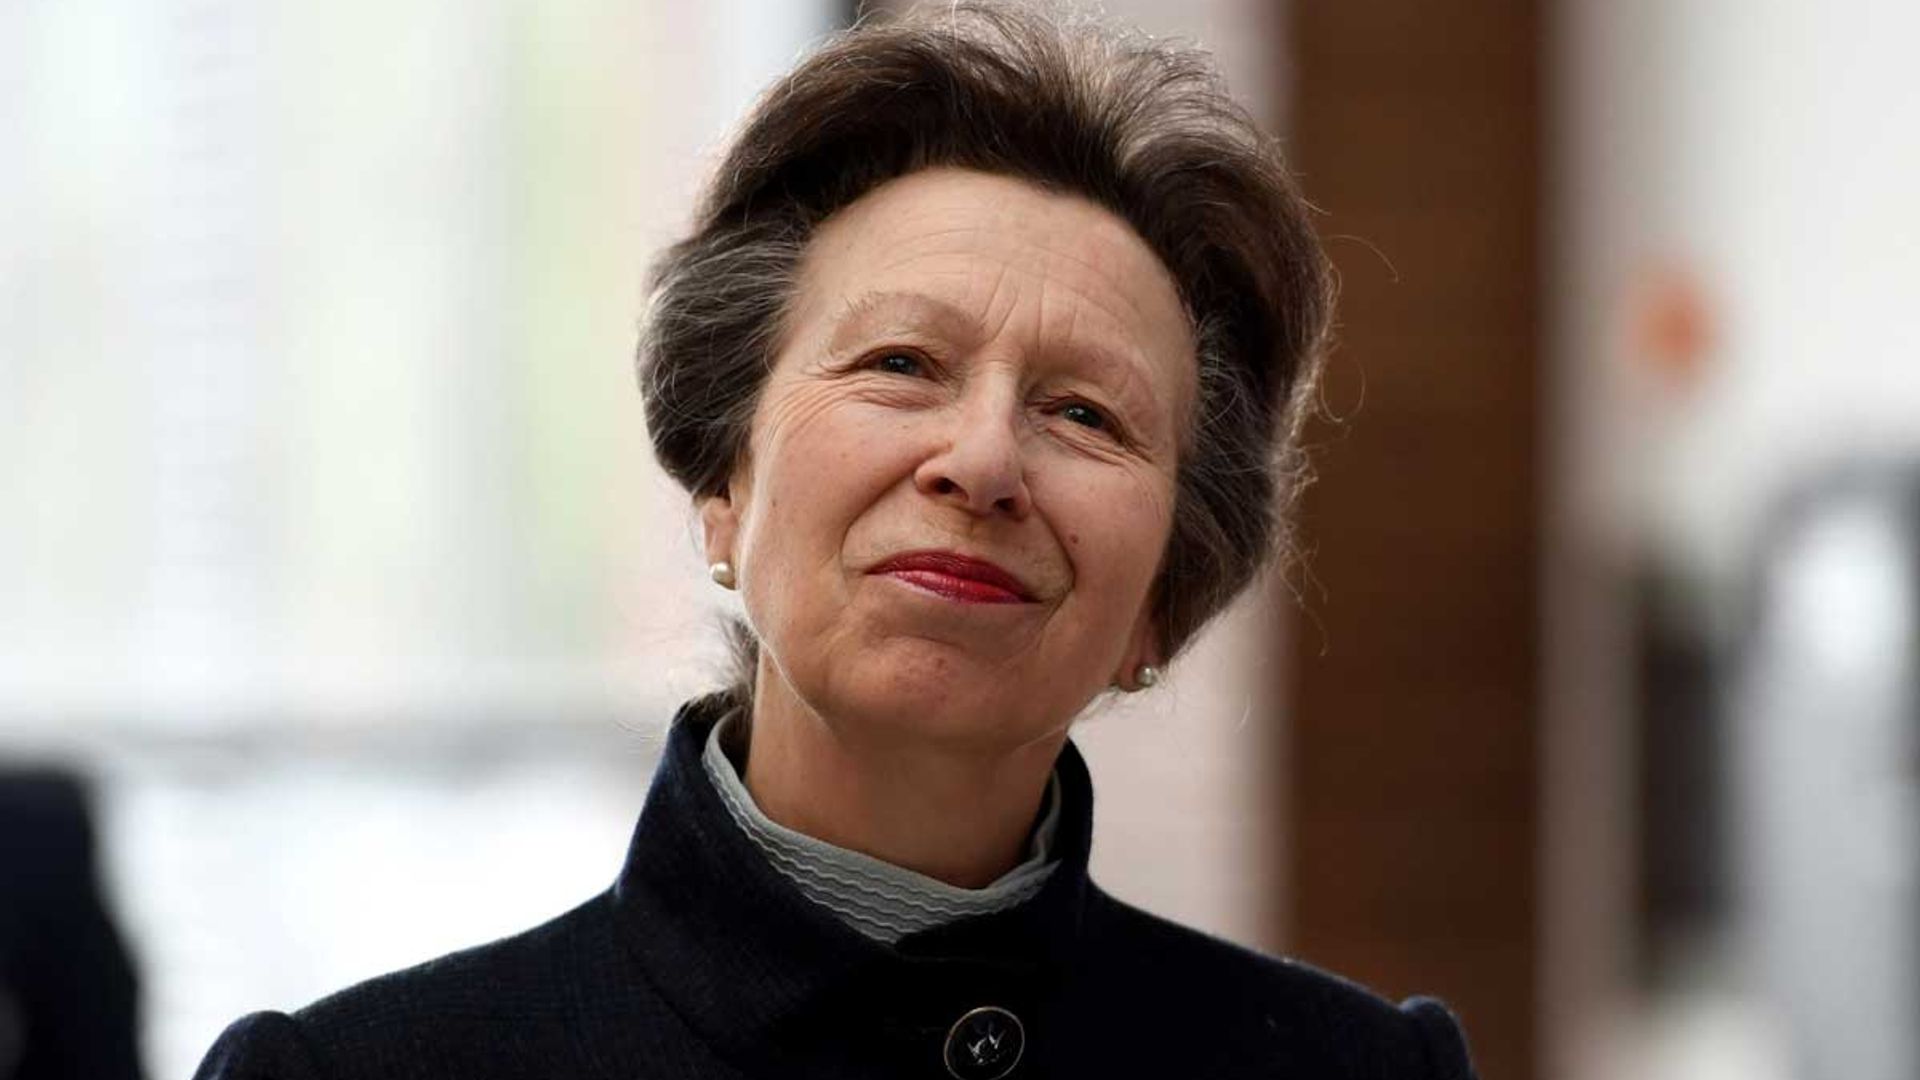 Dinner at Princess Anne's could involve tinned pies and 10p desserts